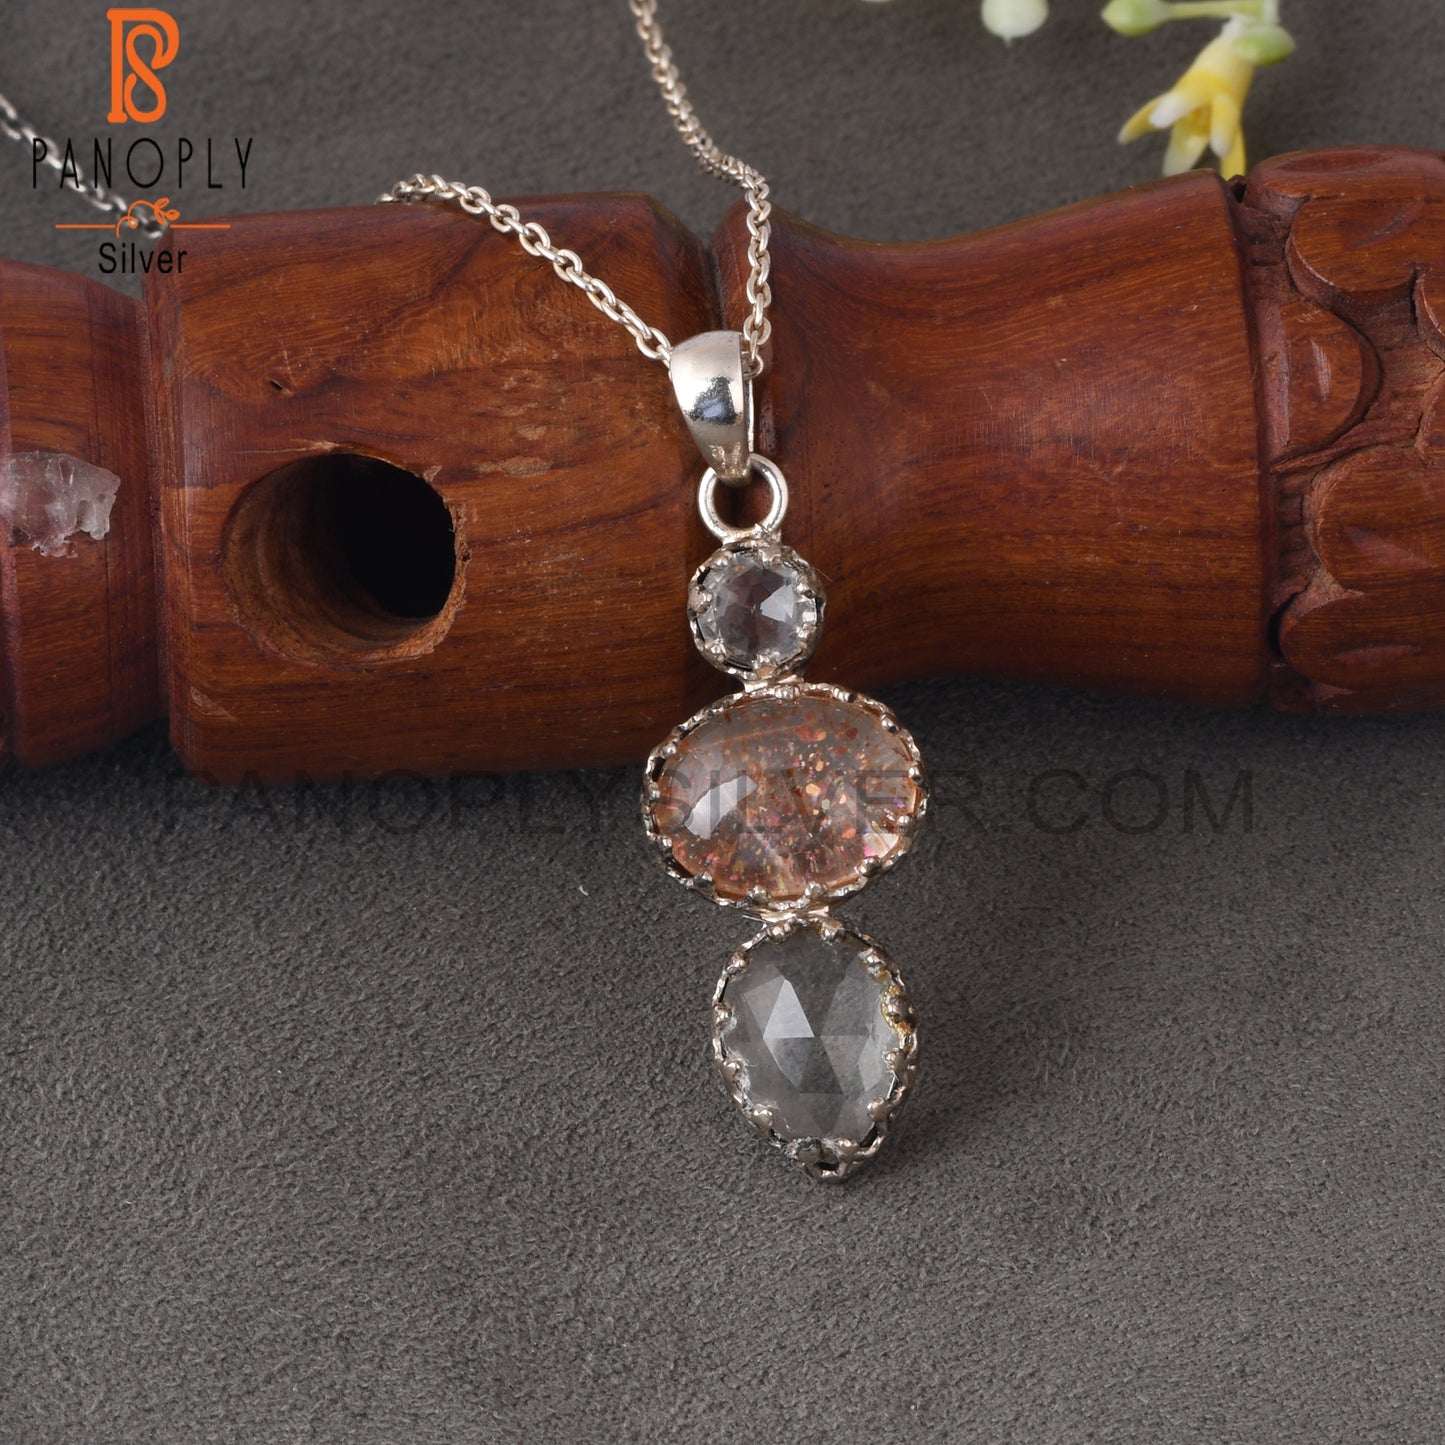 925 Handmade Sterling Silver Beautiful Stone Designer With Crystal Quartz, Doublet Sunstone Quartz And Green Amethyst Gemstone Necklace And Pendant Chain Jewelry